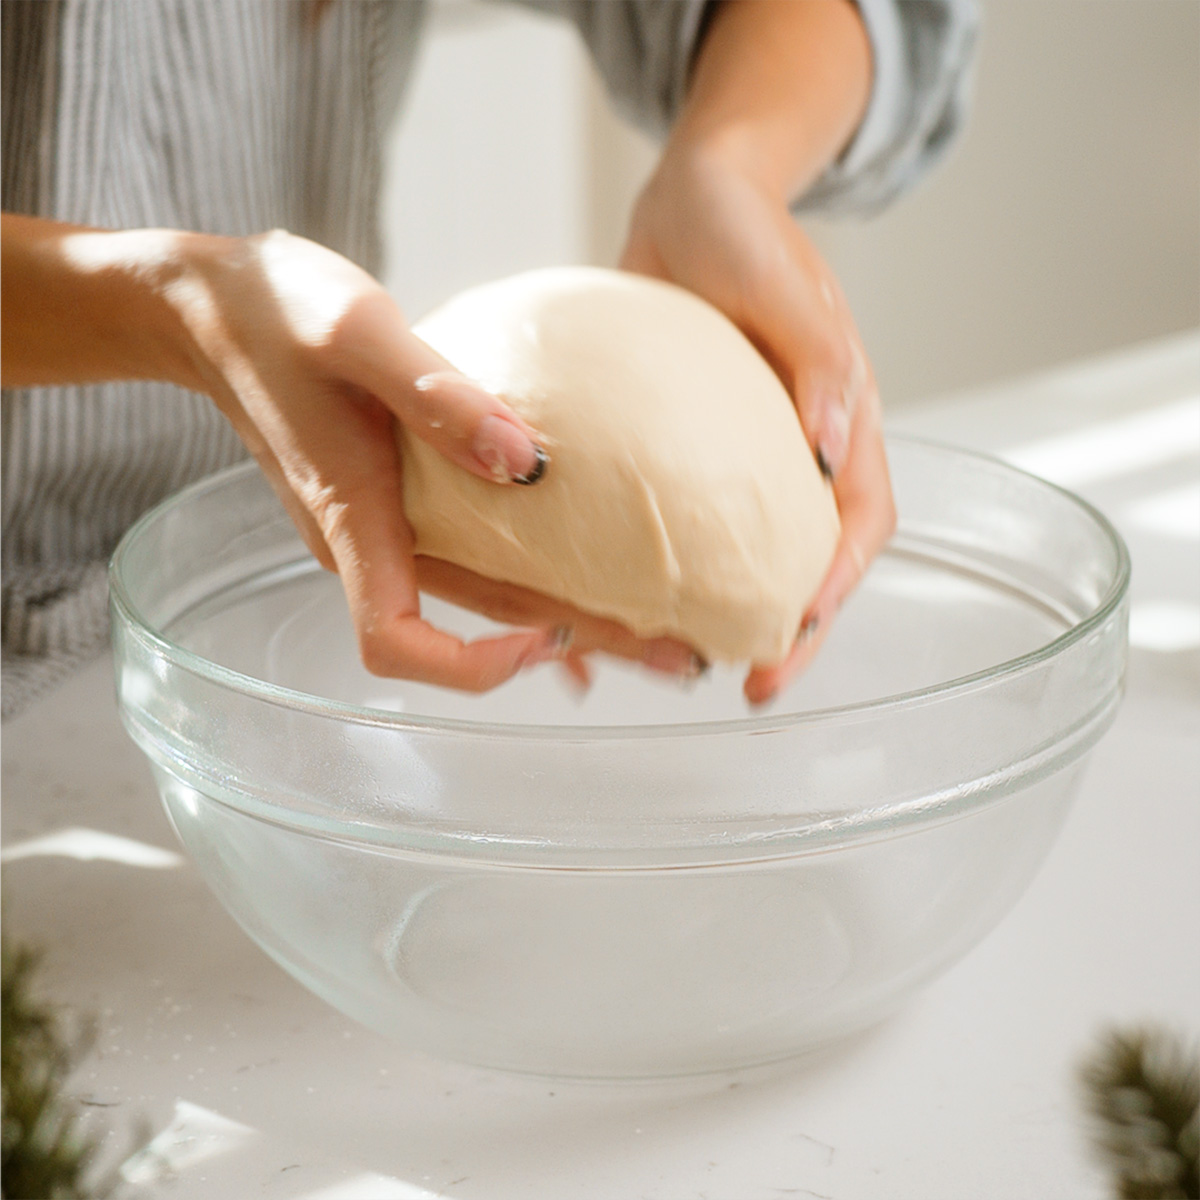 Placing the dough into a bowl to prepare for proofing.